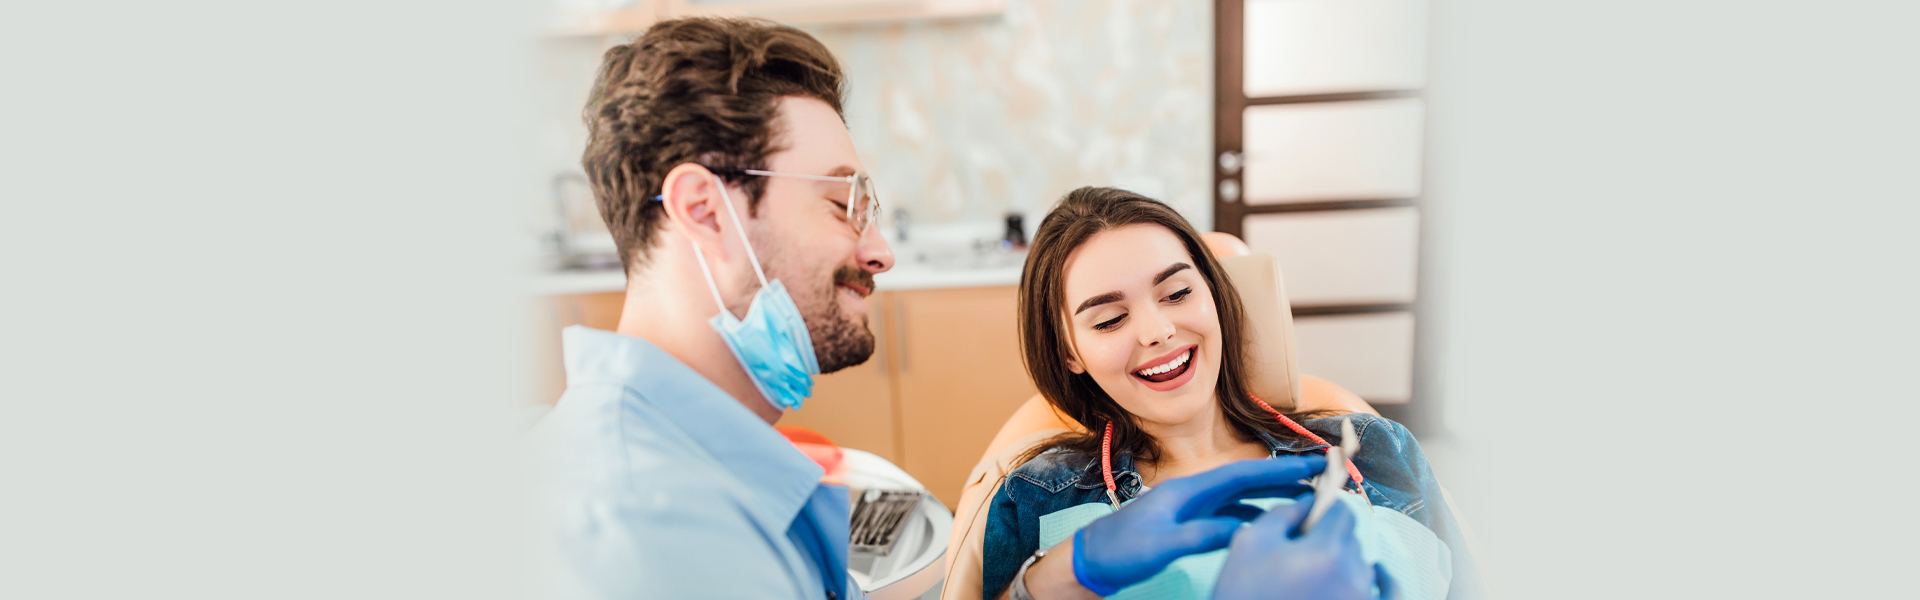 What Can Be Expected Before, During, or After Root Canal Treatment?